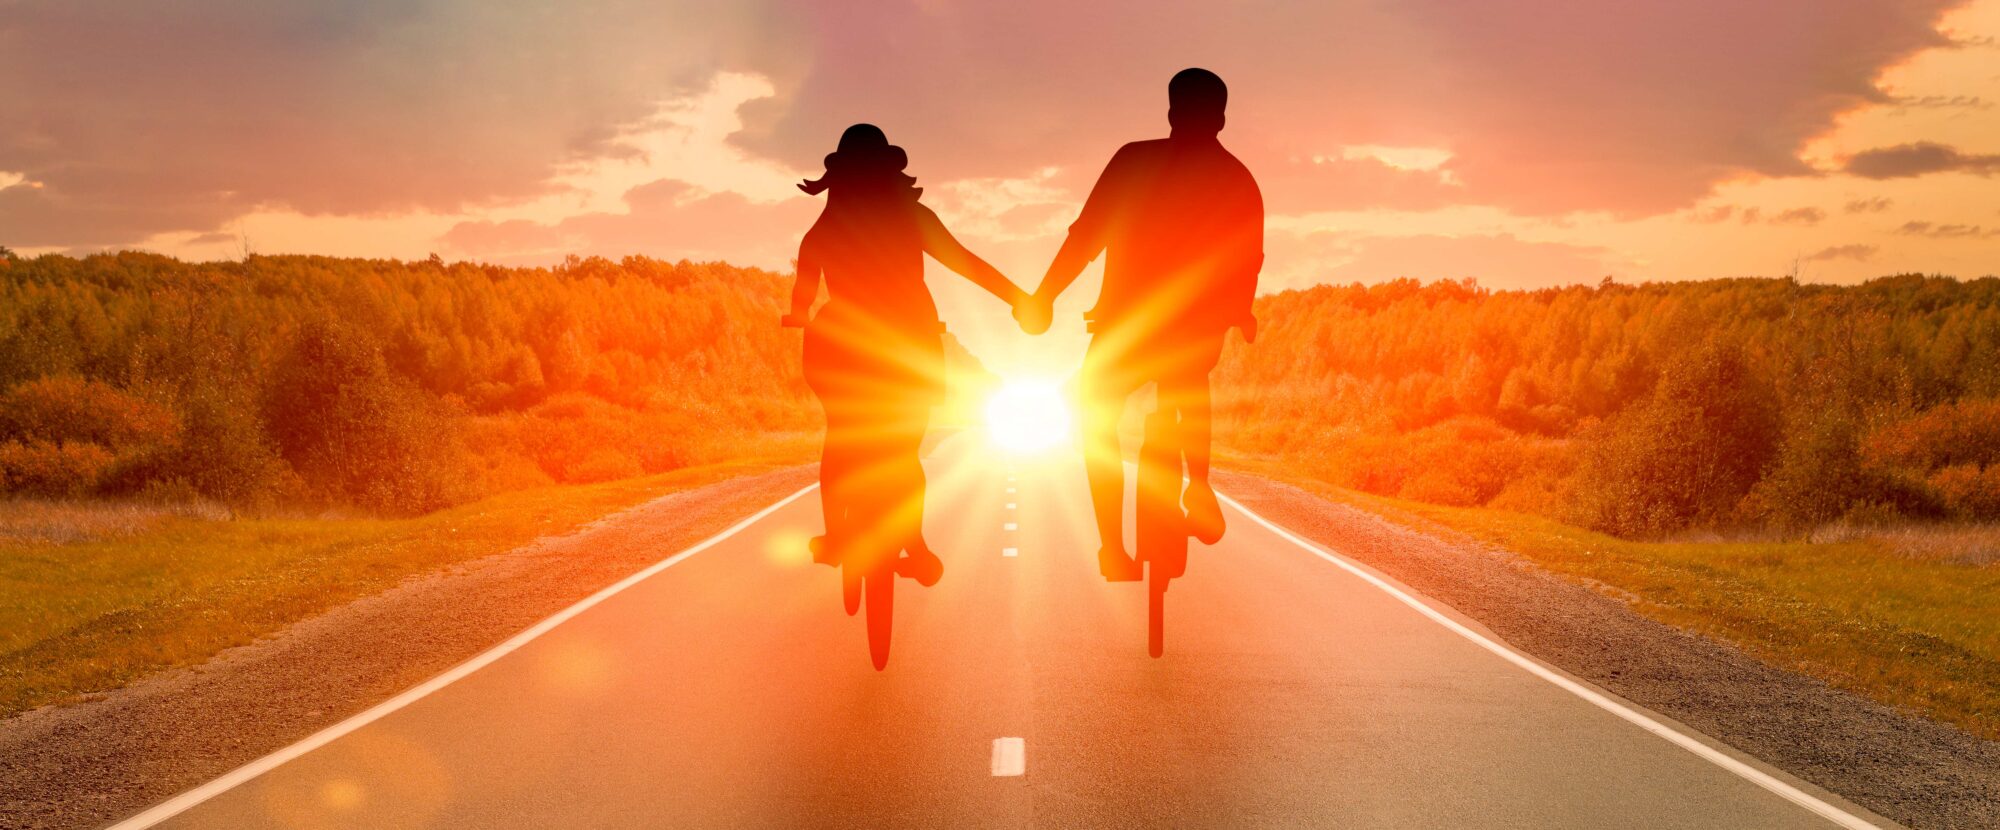 Into The Sunset Together